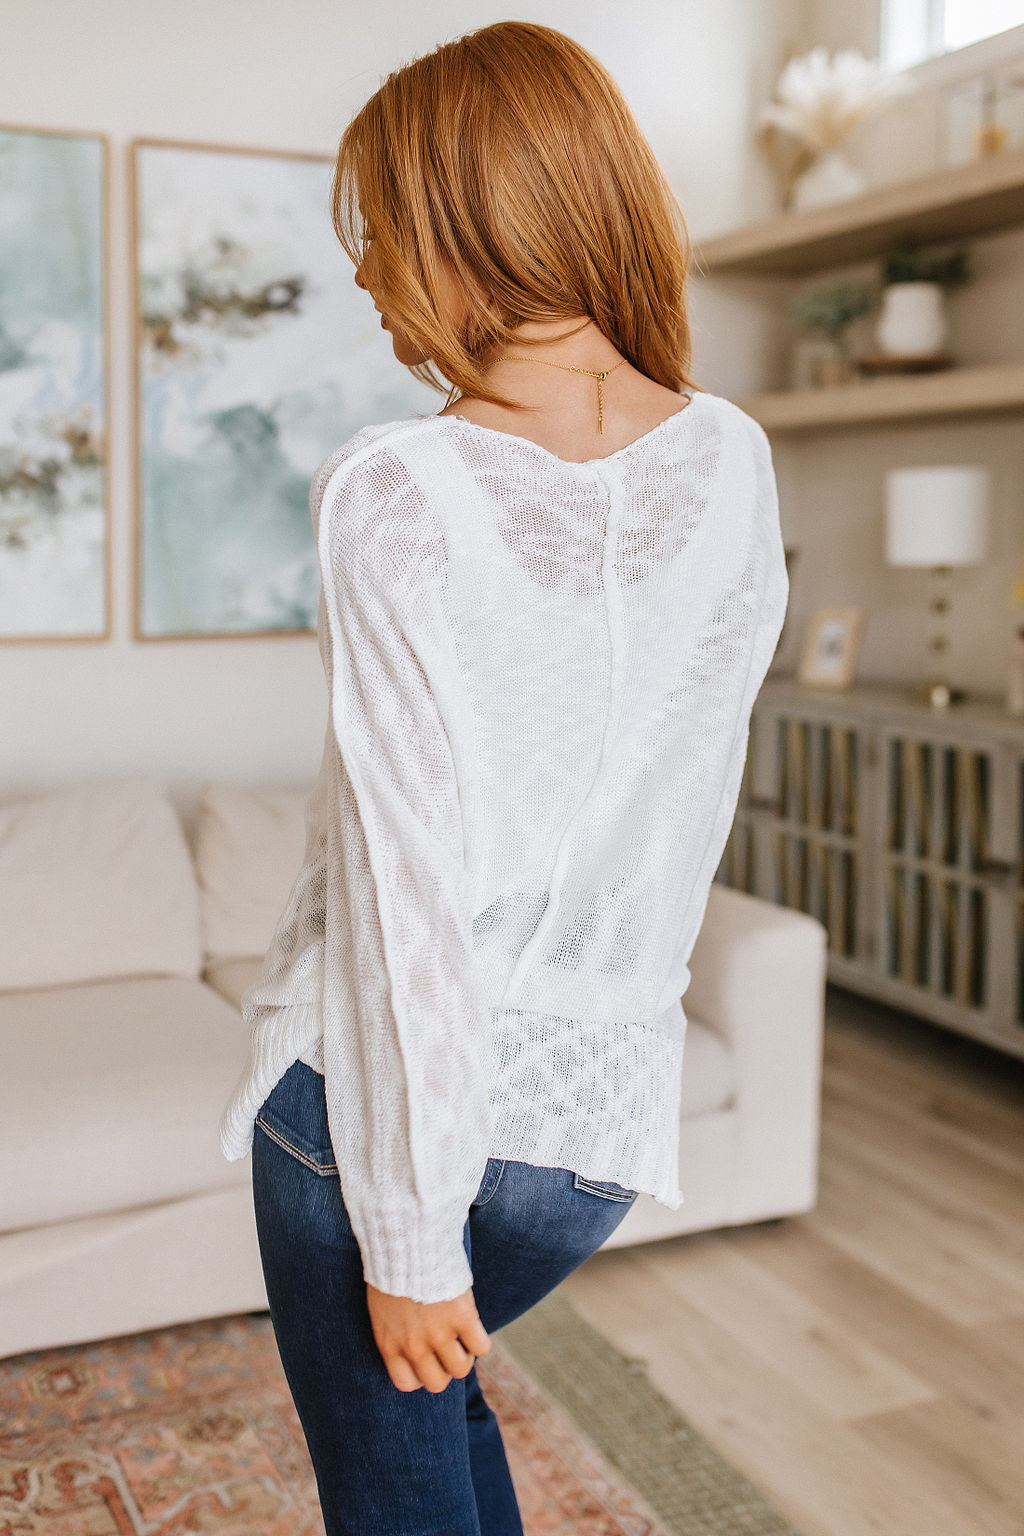 Relax With Me Knit Top in White (Online Exclusive)